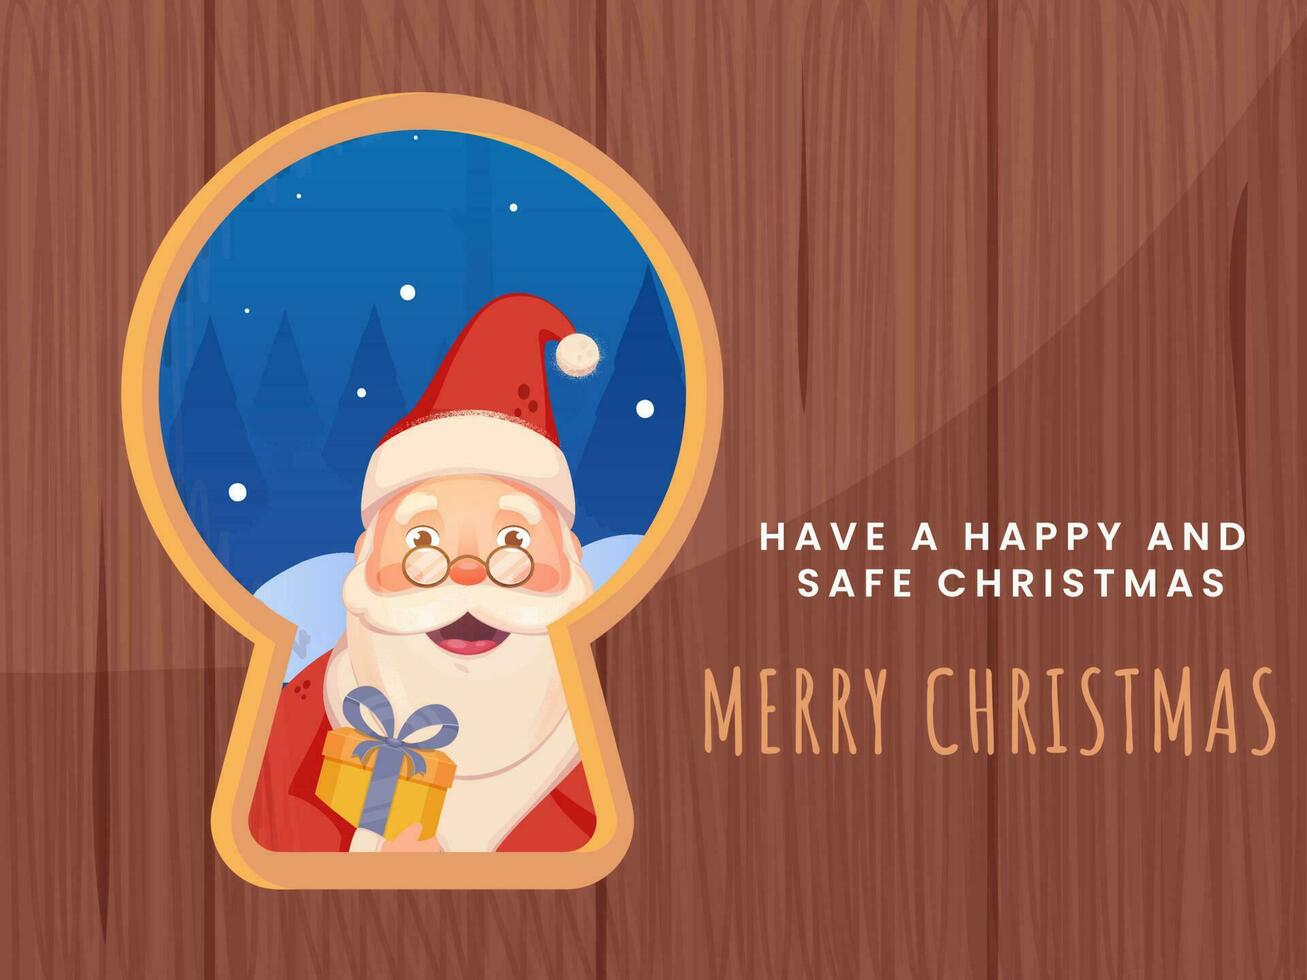 Cartoon Santa Claus Peeking From Door Keyhole With Wooden Texture For Happy And Safe Merry Christmas. vector